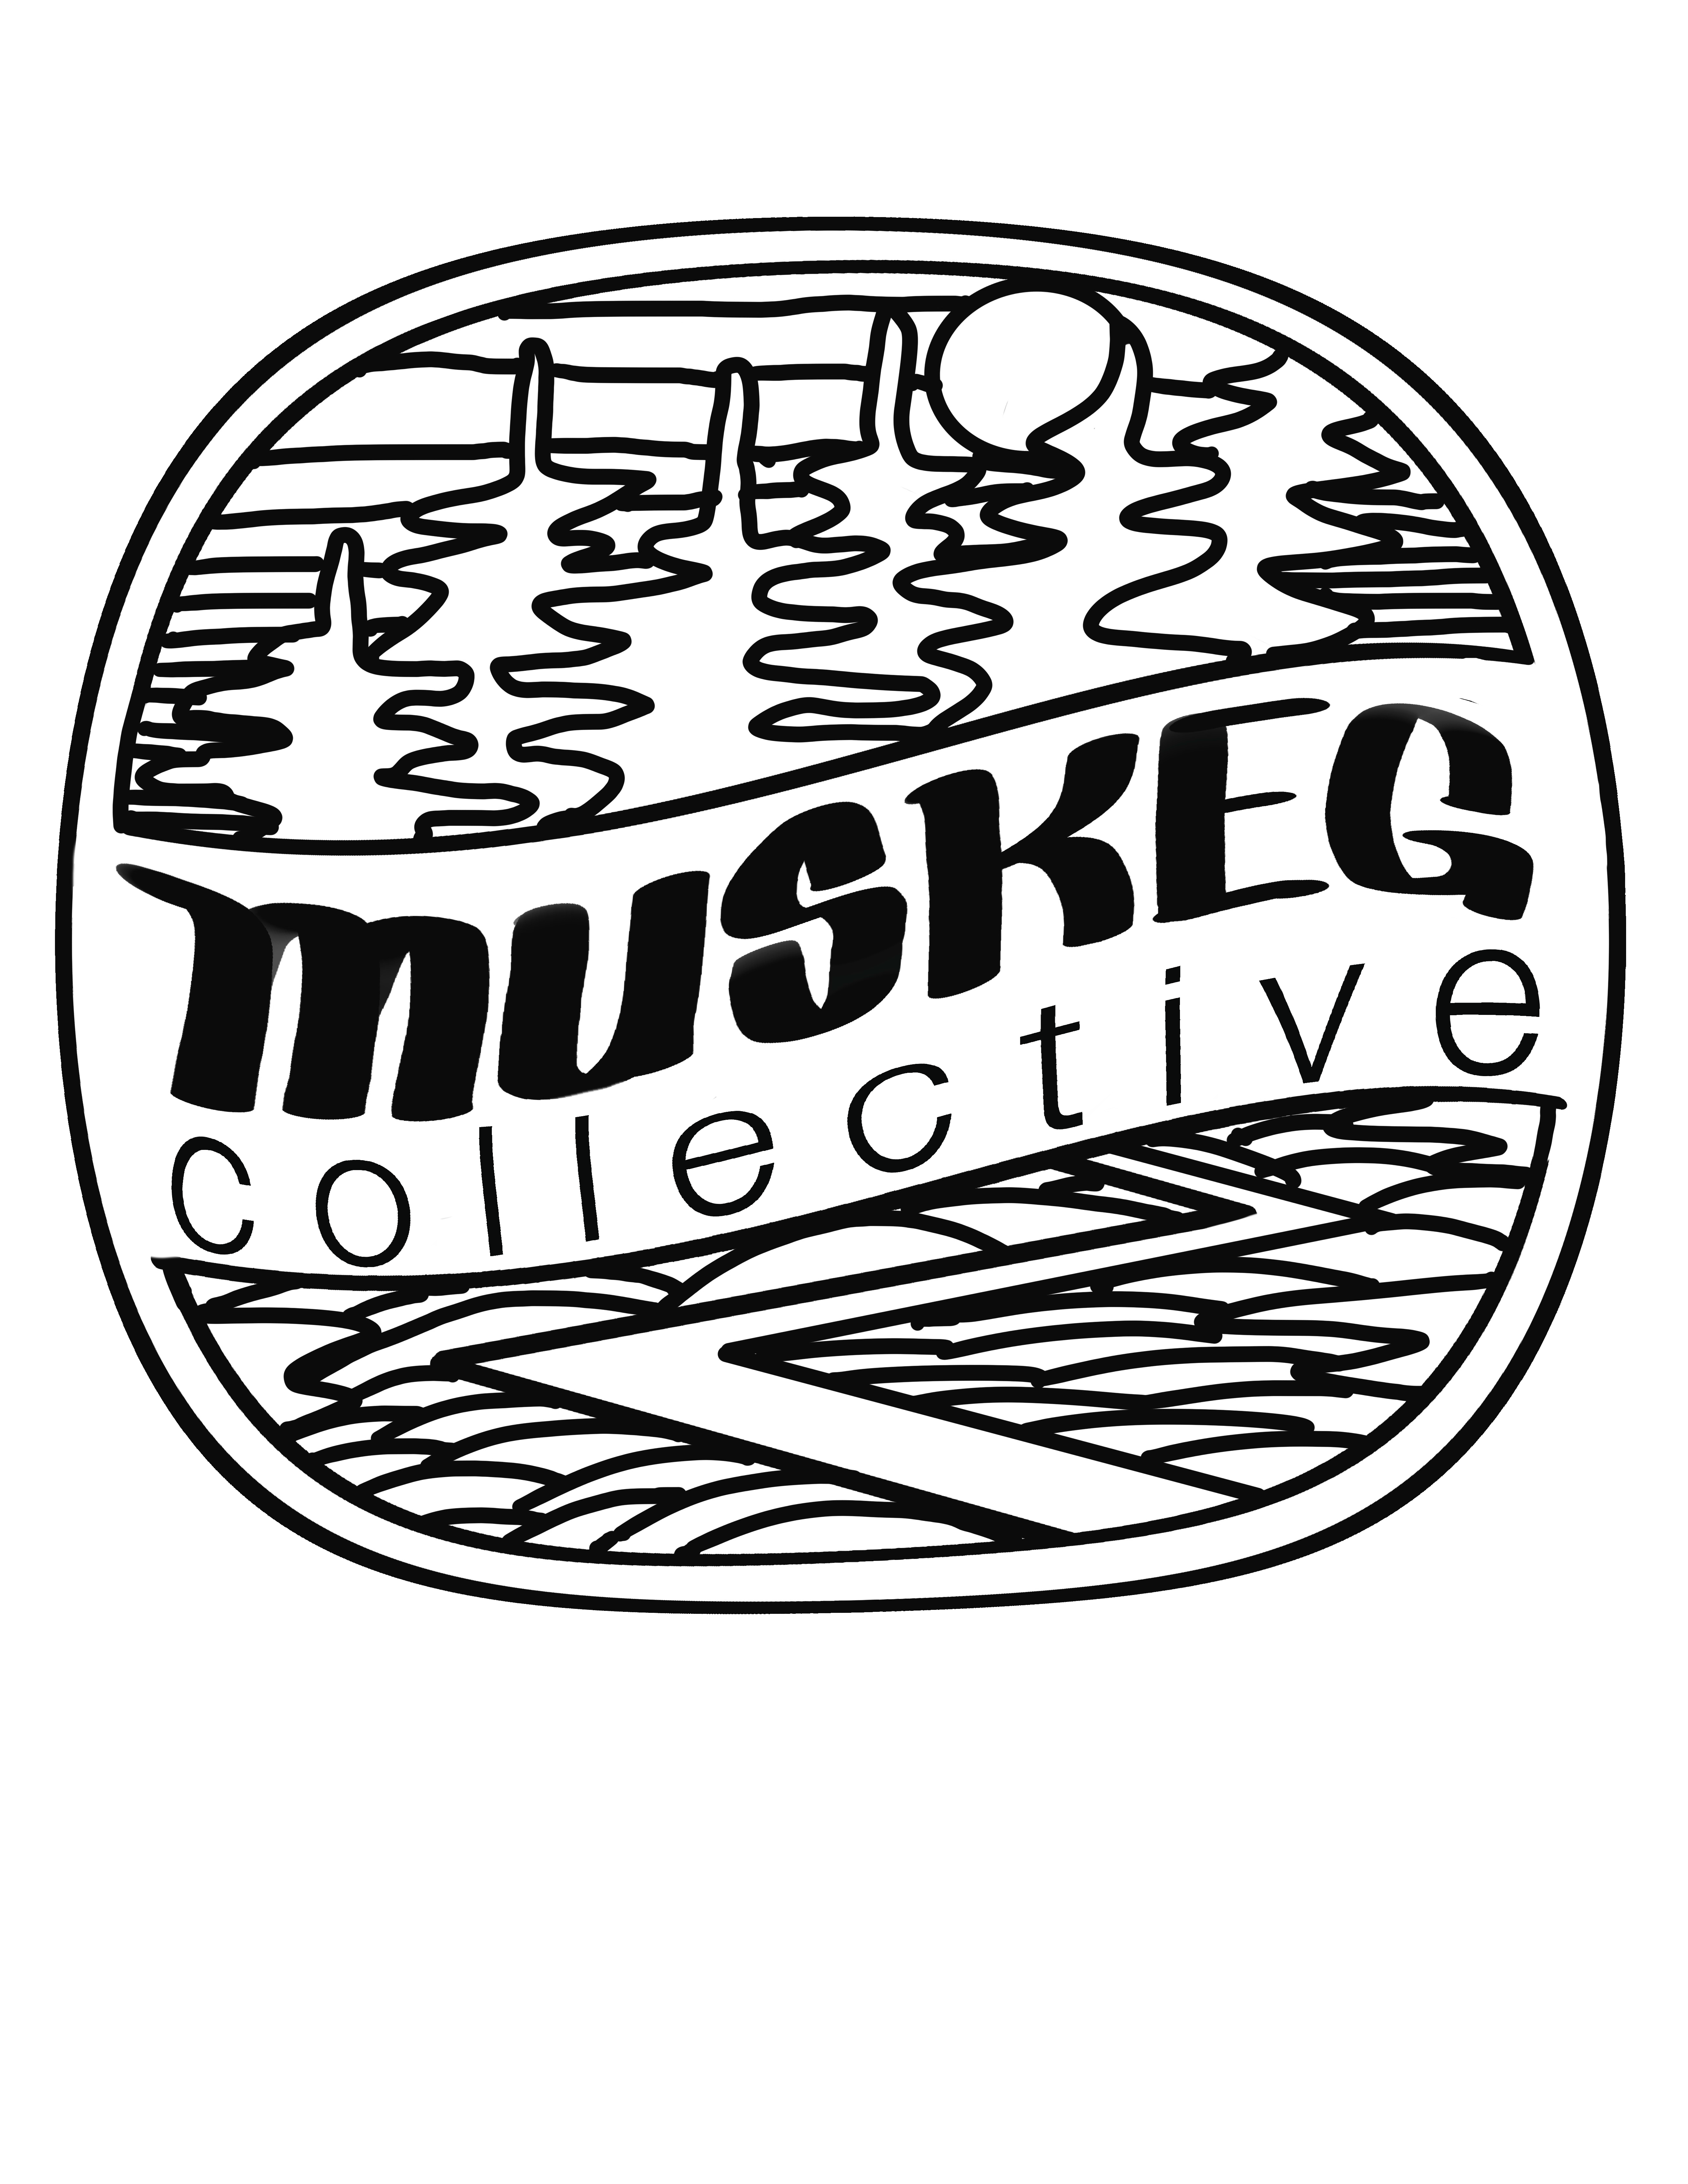 Muskeg Collective